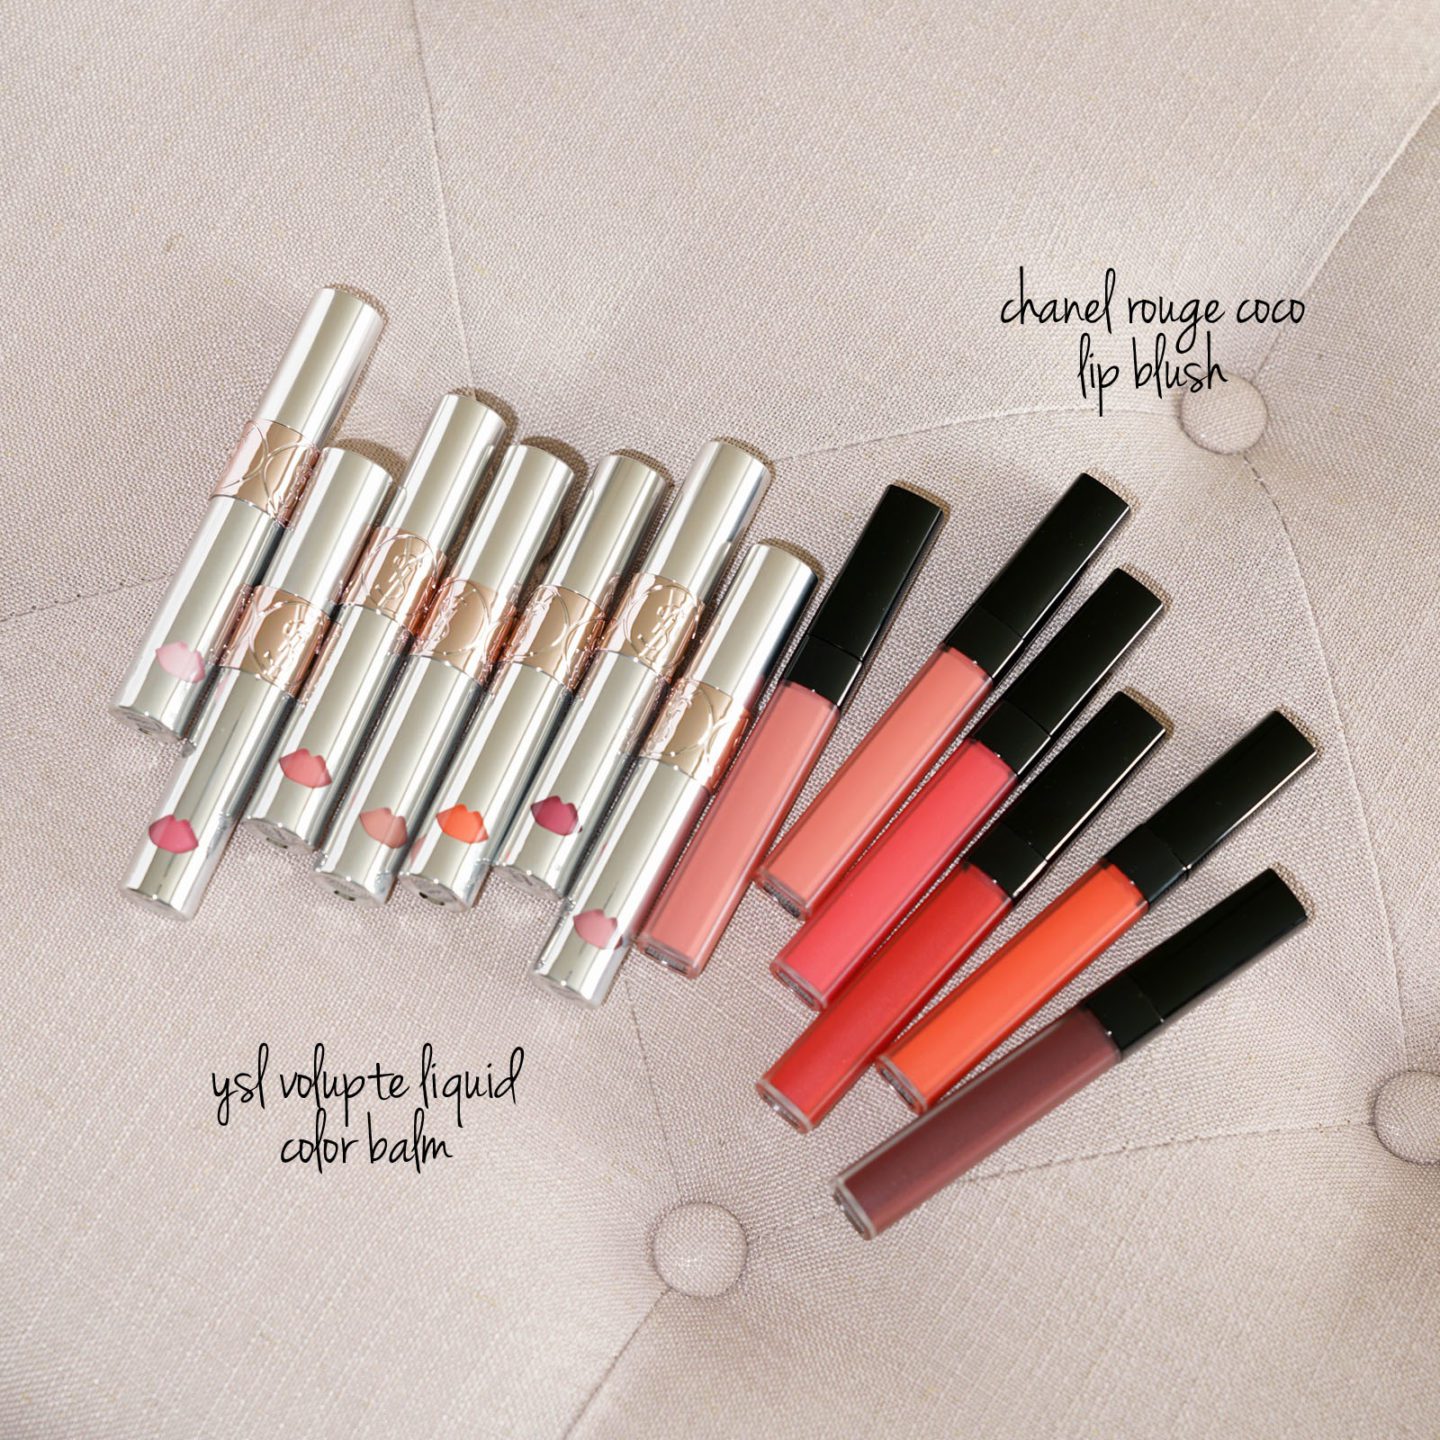 YSL Volupte Liquid Colour Balms and Chanel Rouge Coco Lip Blush Swatches | The Beauty Look Book